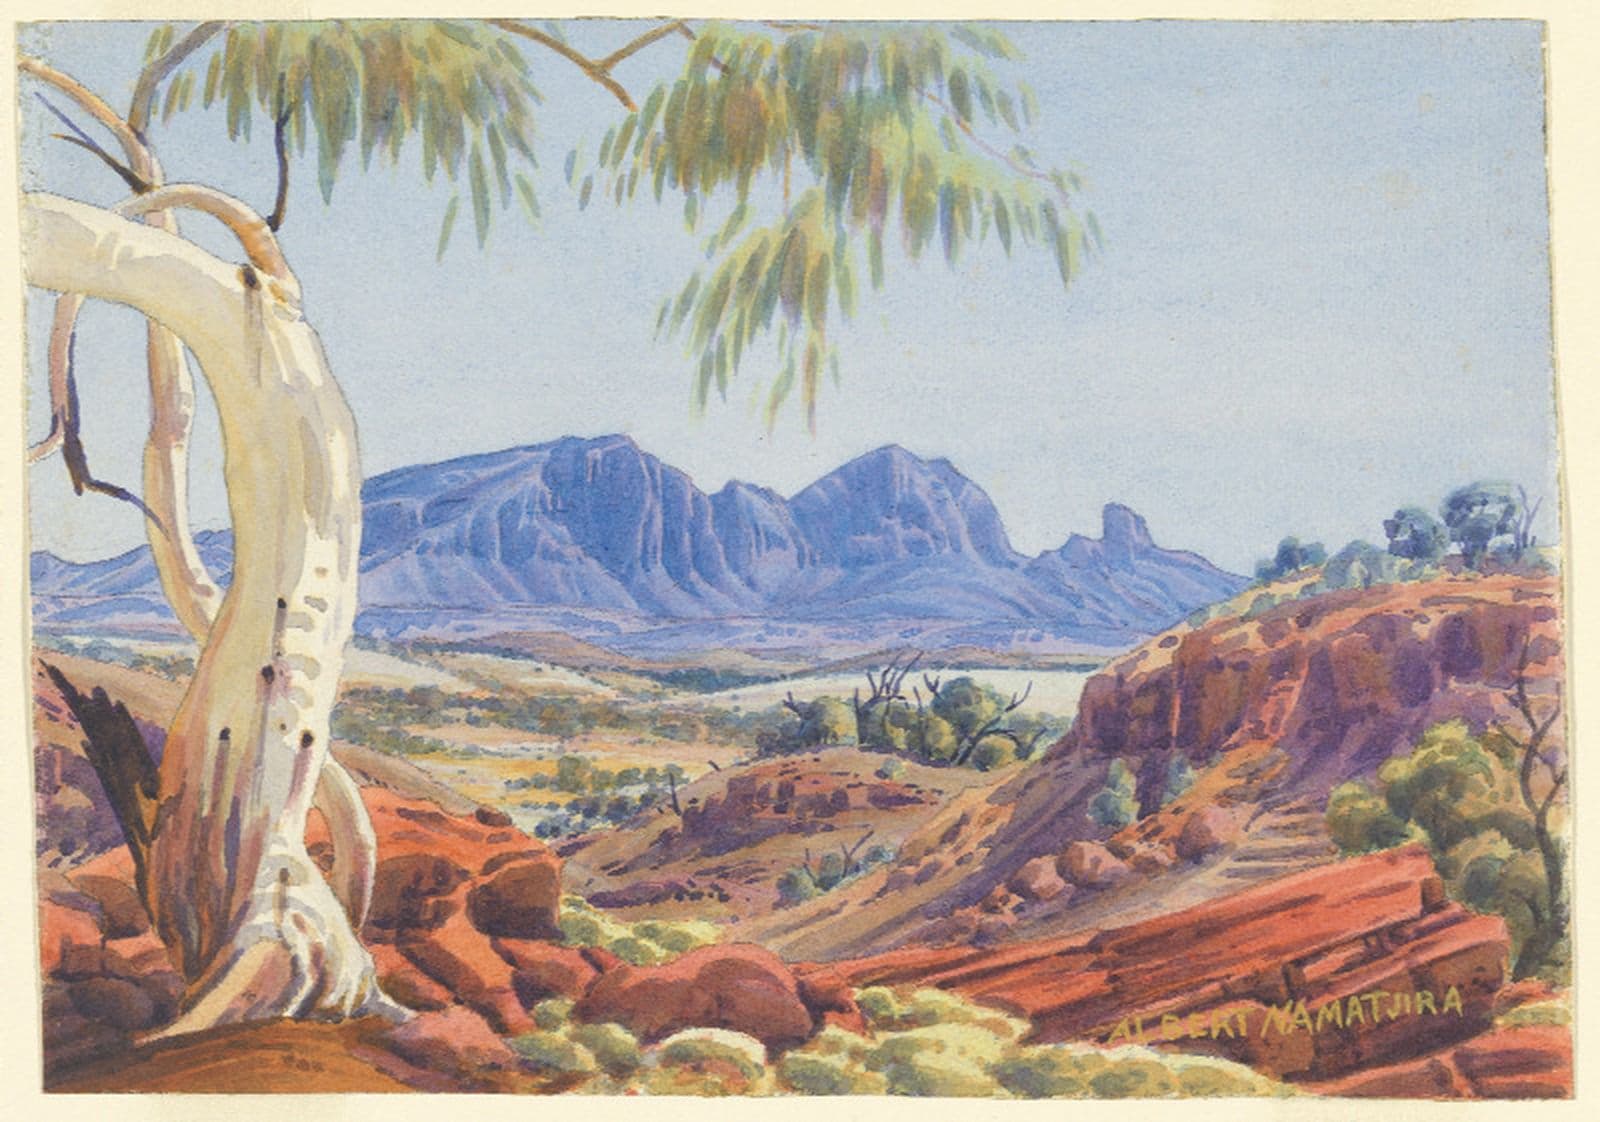 Watercolour landscape featuring a white gum in the foreground and mountain range in background